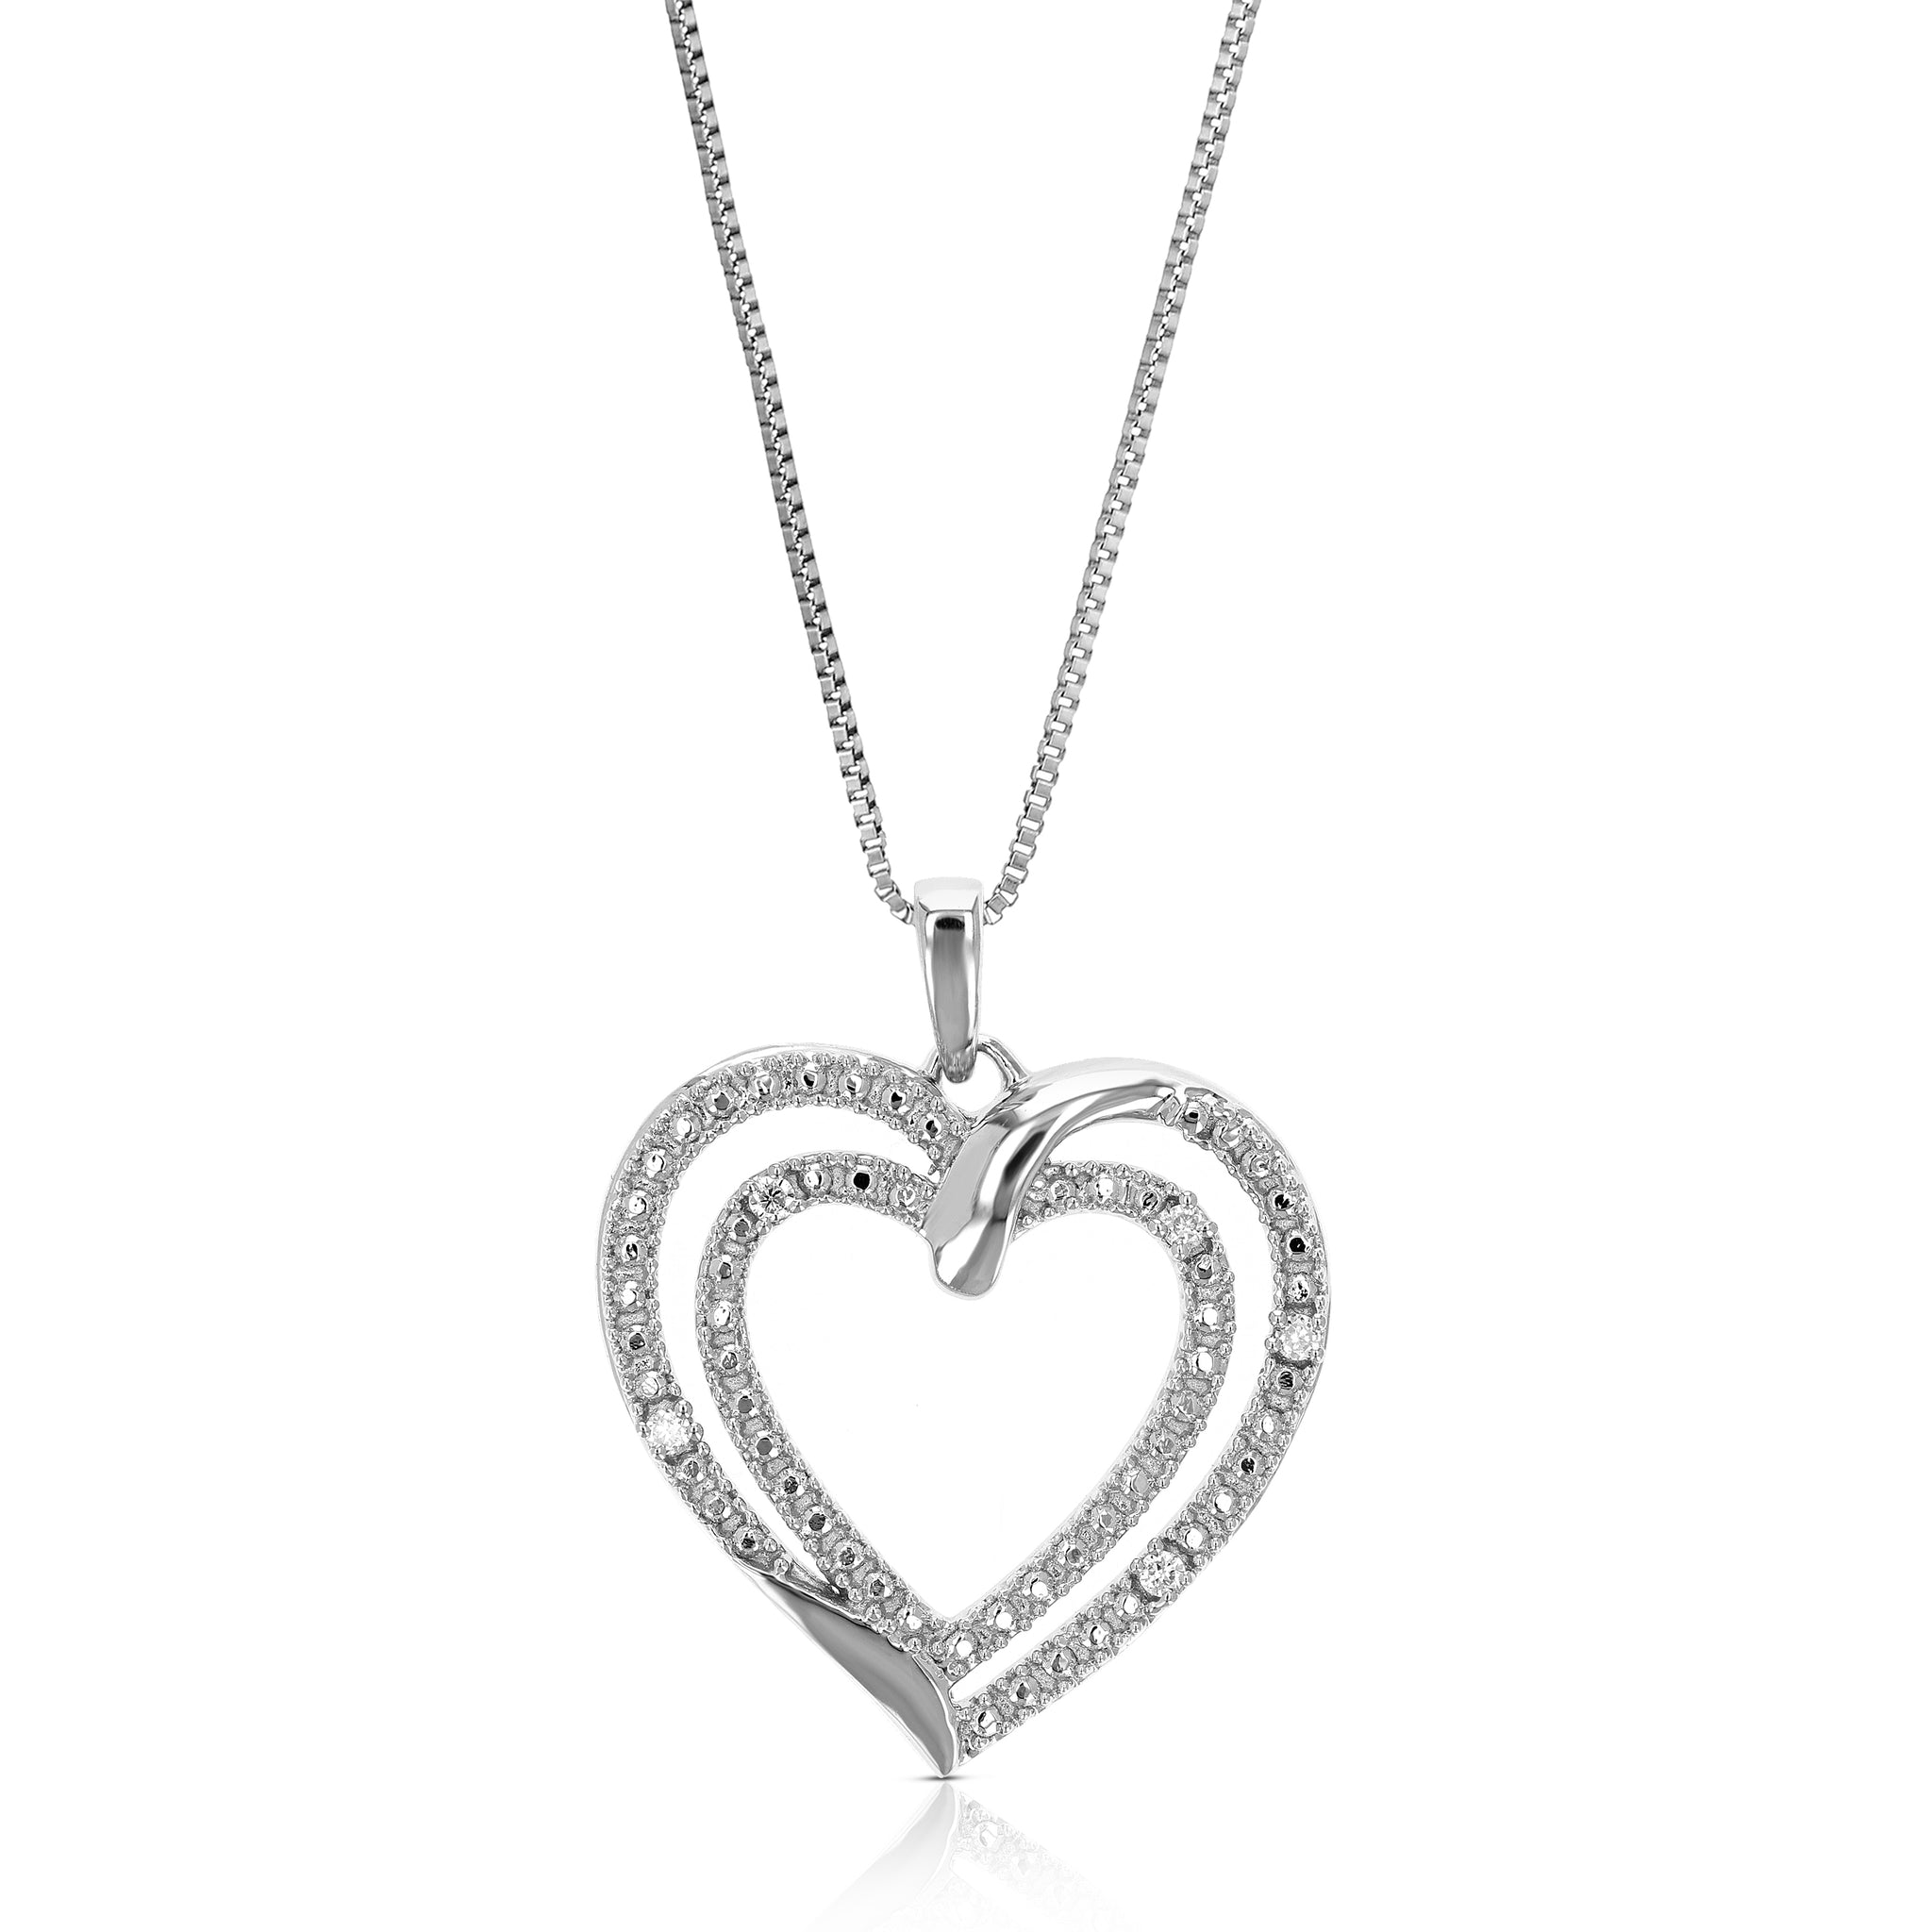 Sterling Silver Classic Heart Locket Pendant Necklace, 19mm pendant, 18  box chain